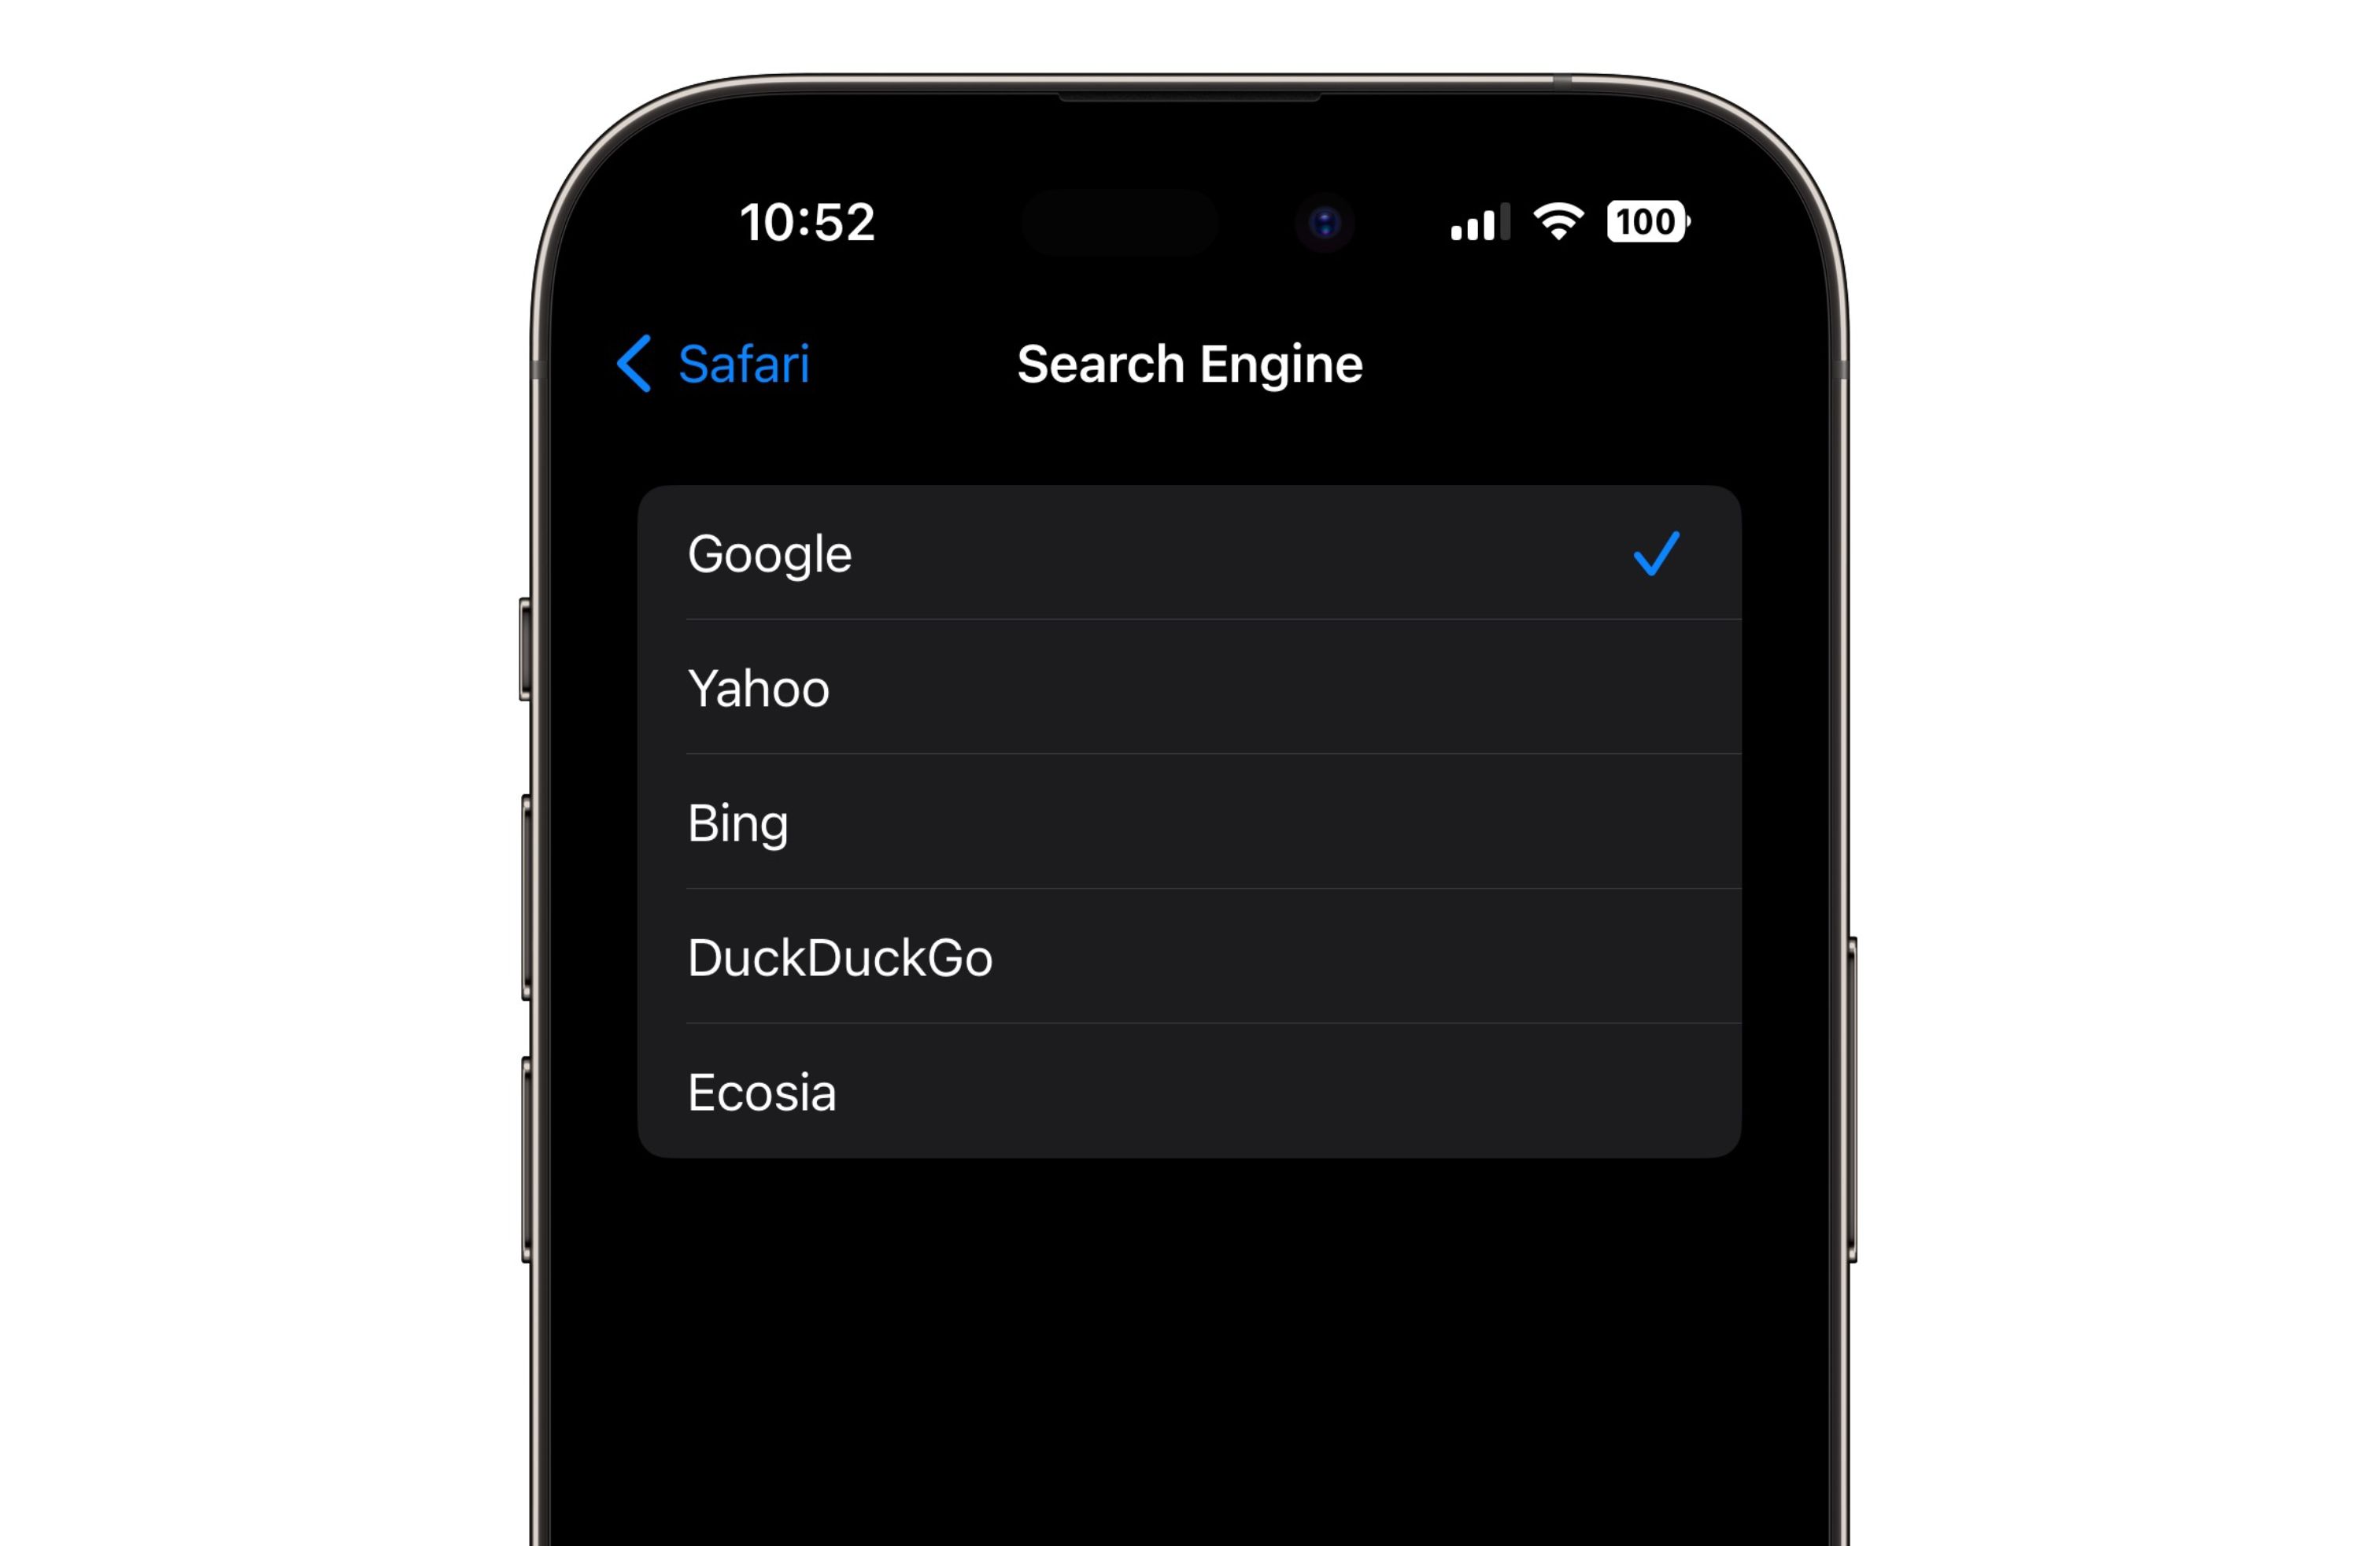 Google paid Apple $20 billion in 2022 to be the default search engine for Safari on iPhone, iPad, and Mac, reports Bloomberg. The information was reve